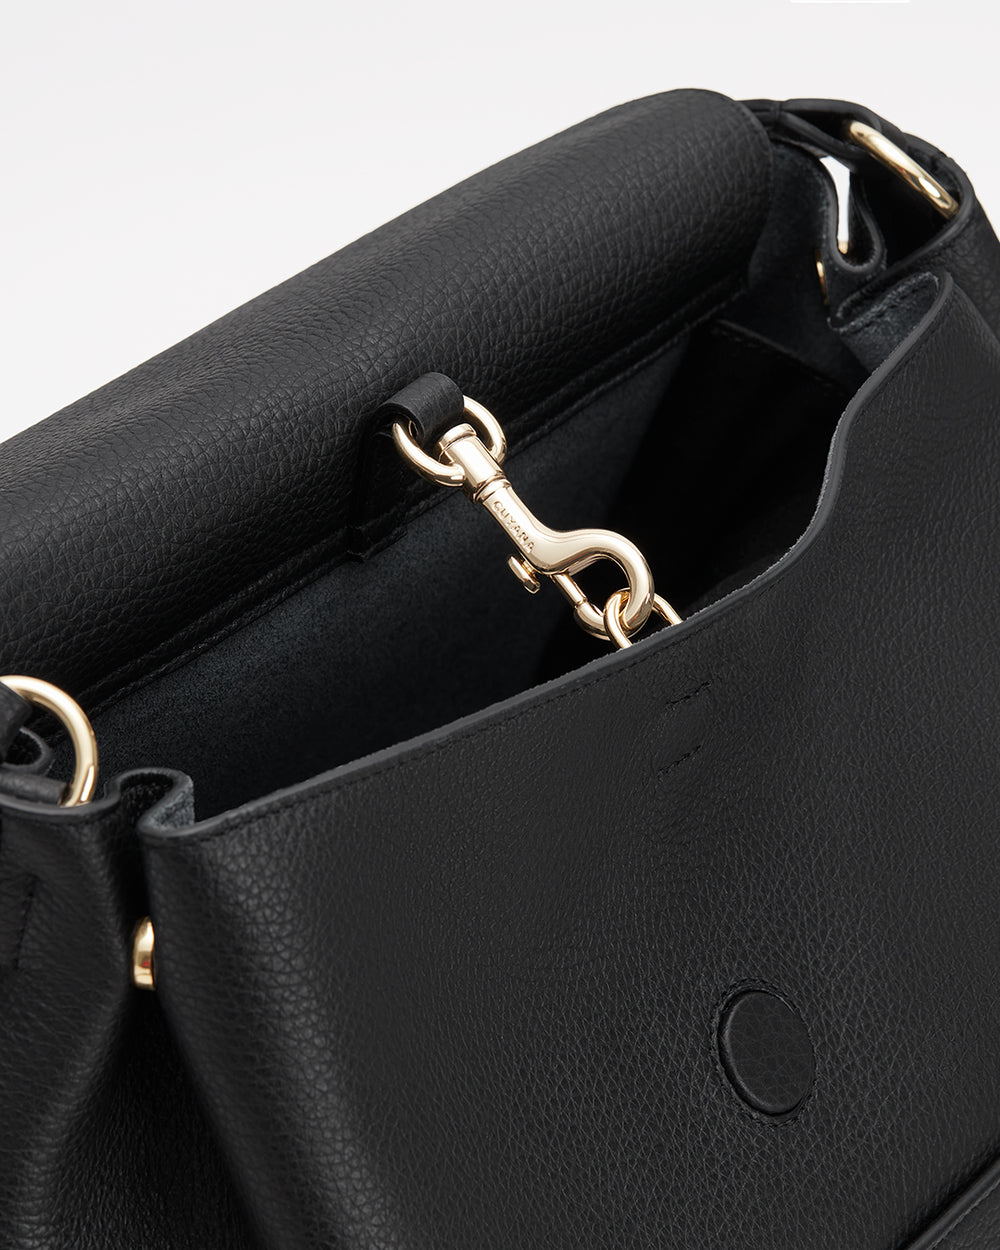 Close-up view of an open handbag showing the clasp and inner lining.